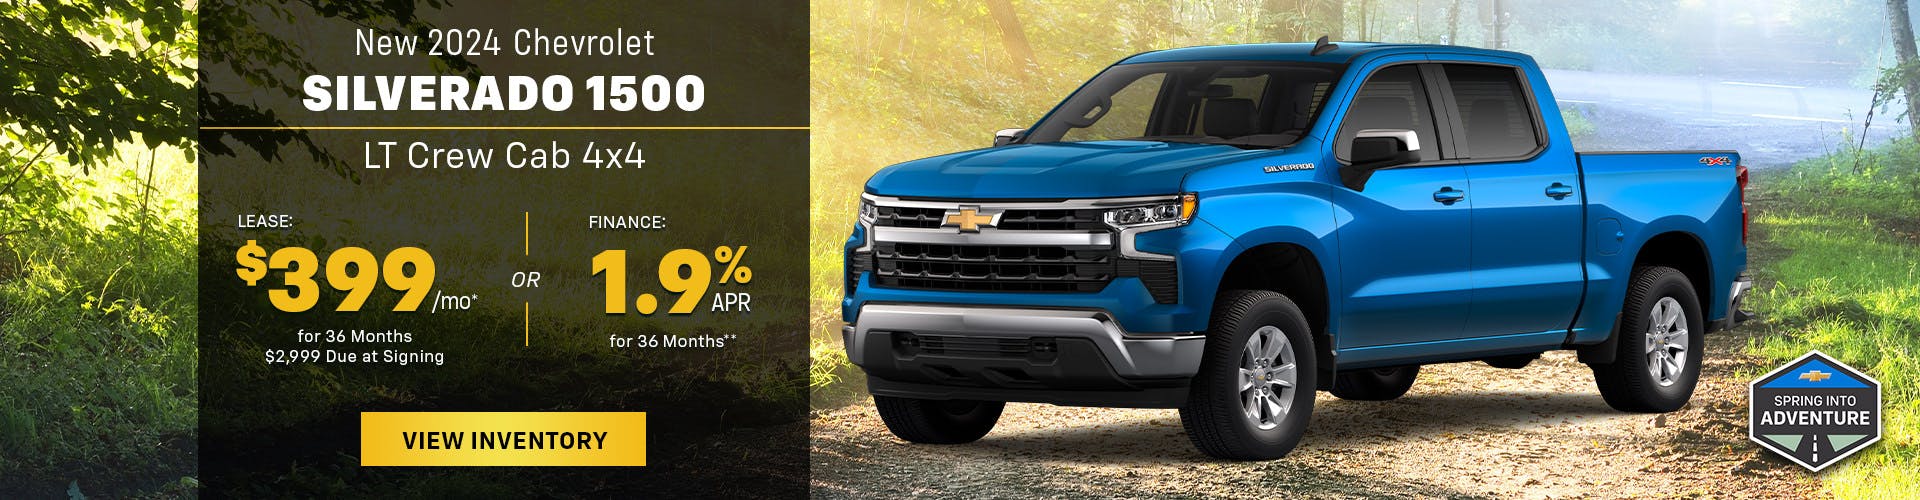 New 2024 Silverado 1500 – Lease for $399/Month